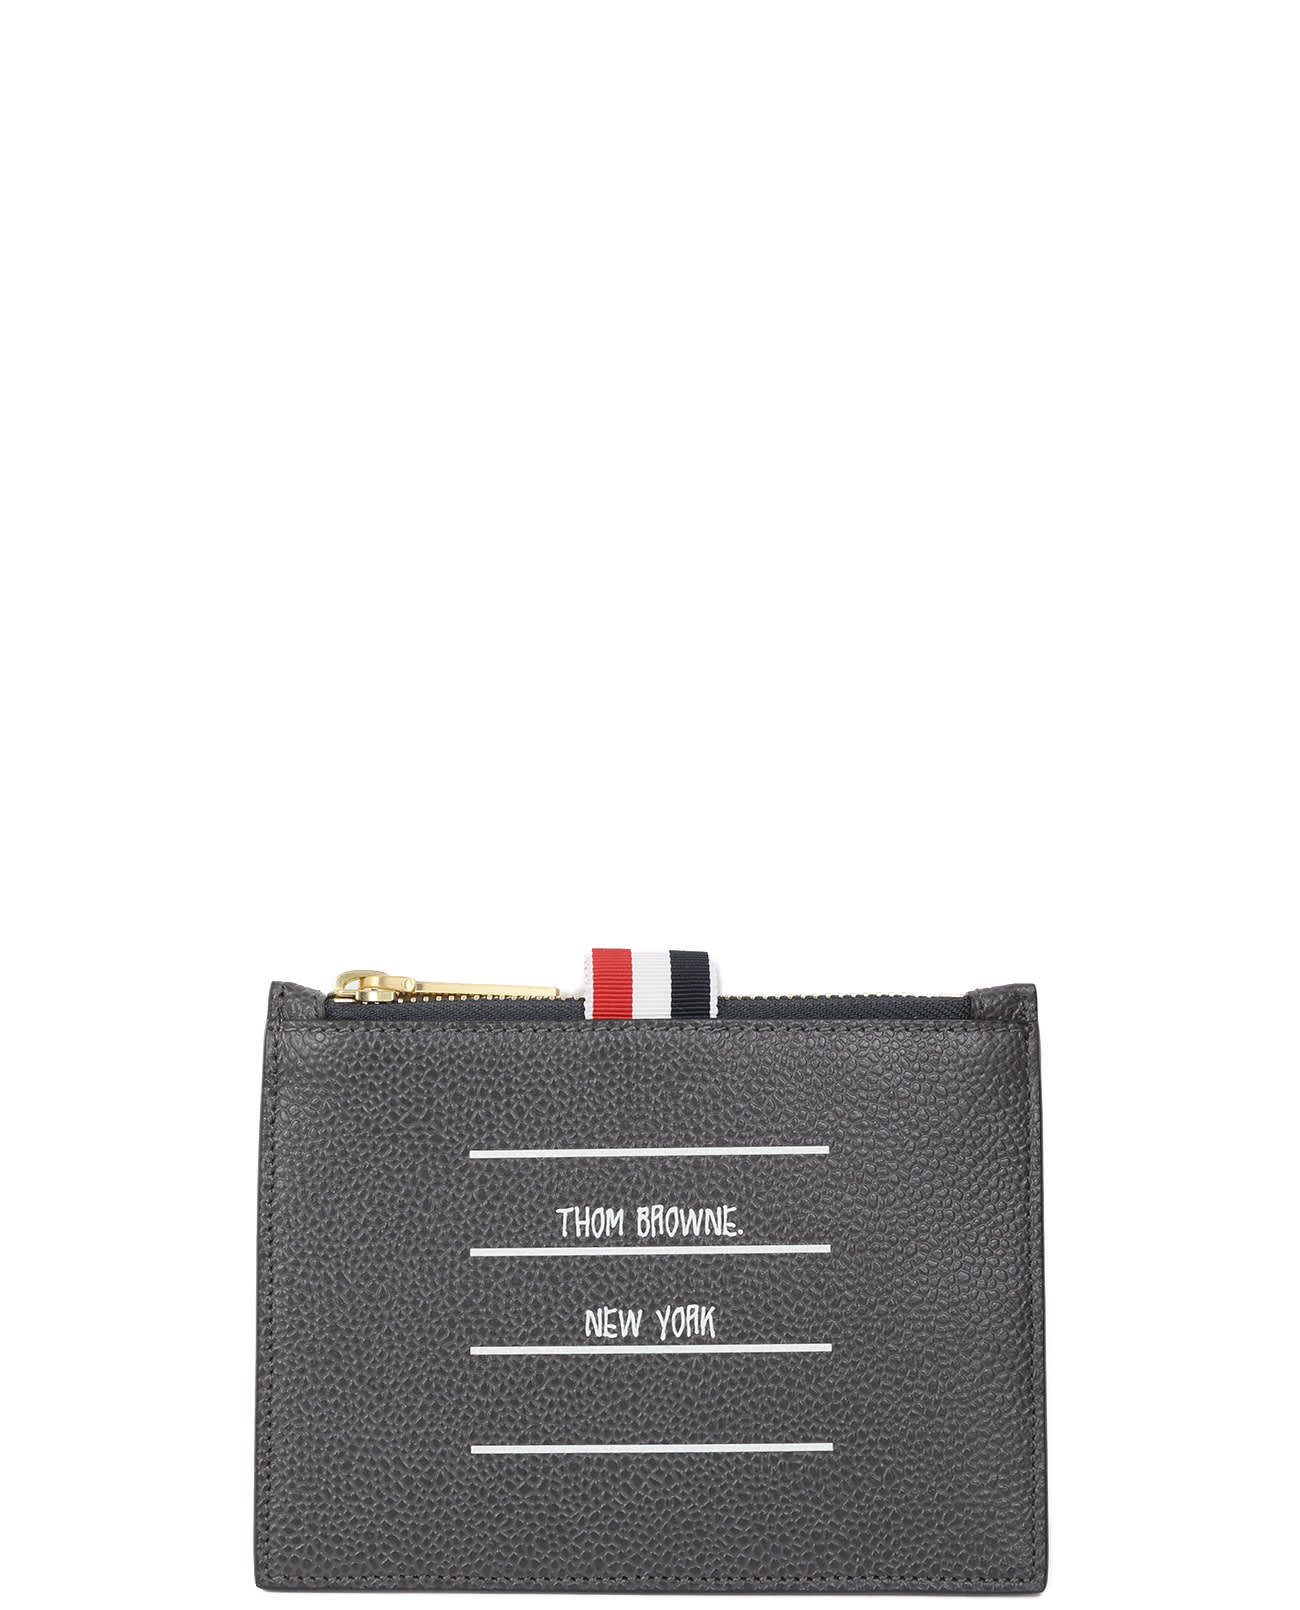 Thom Browne Grey Coin Pouch